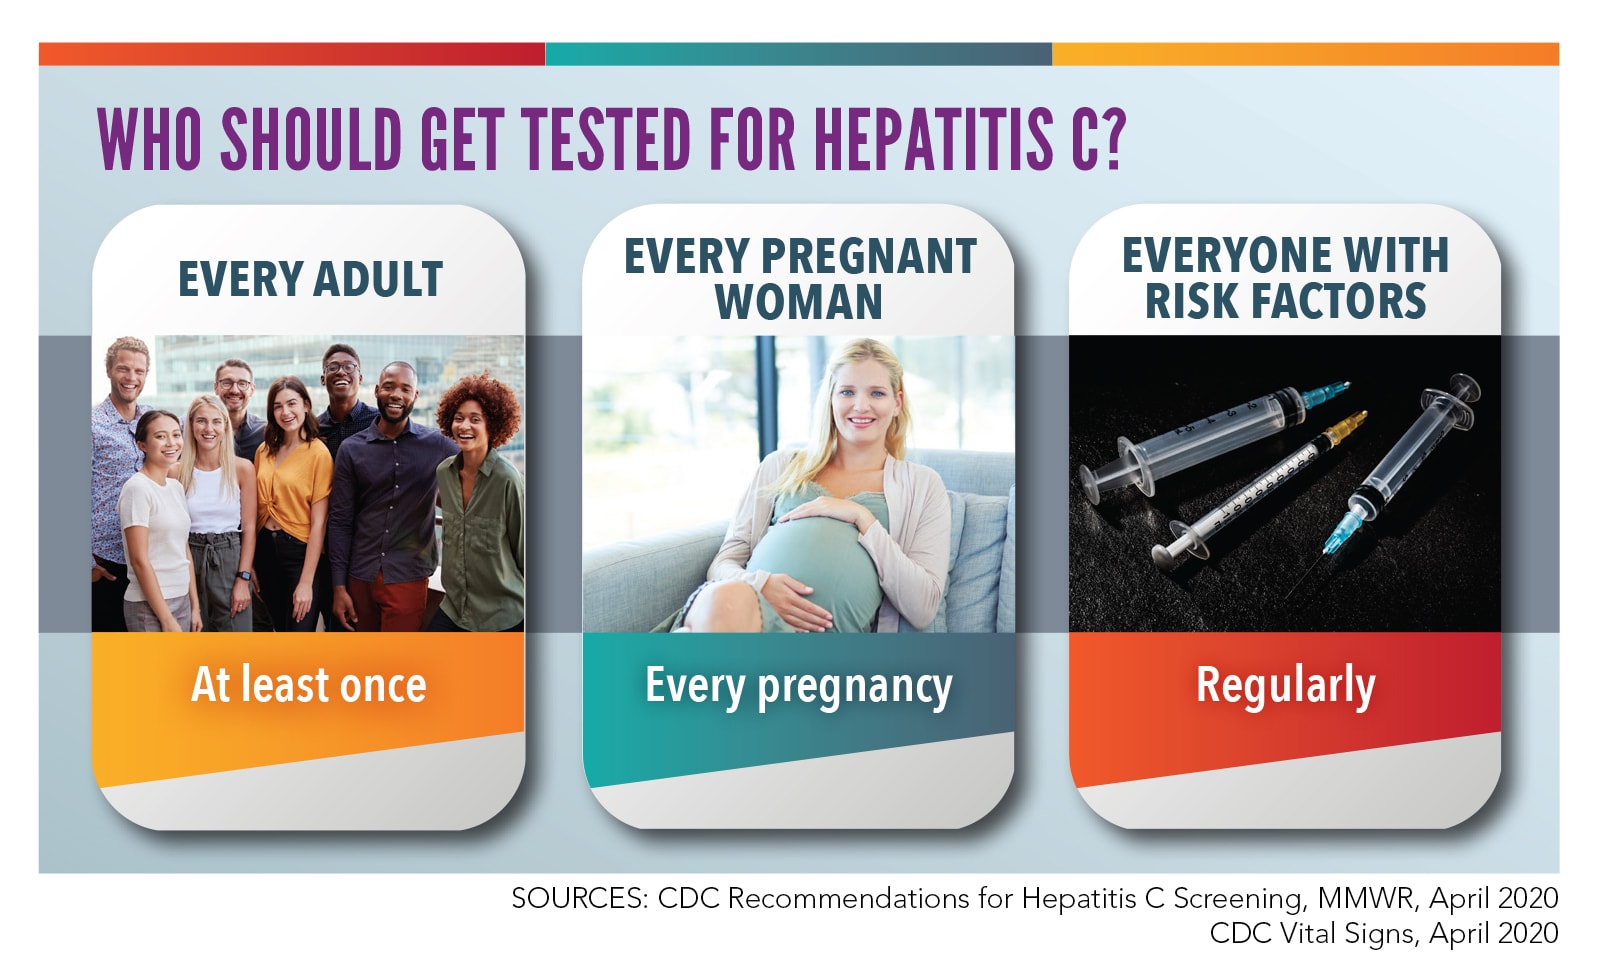 Who should get tested for hepatitis C? Every adult at least once. Every pregnant woman with every pregnancy. Everyone with risk factors regularly.